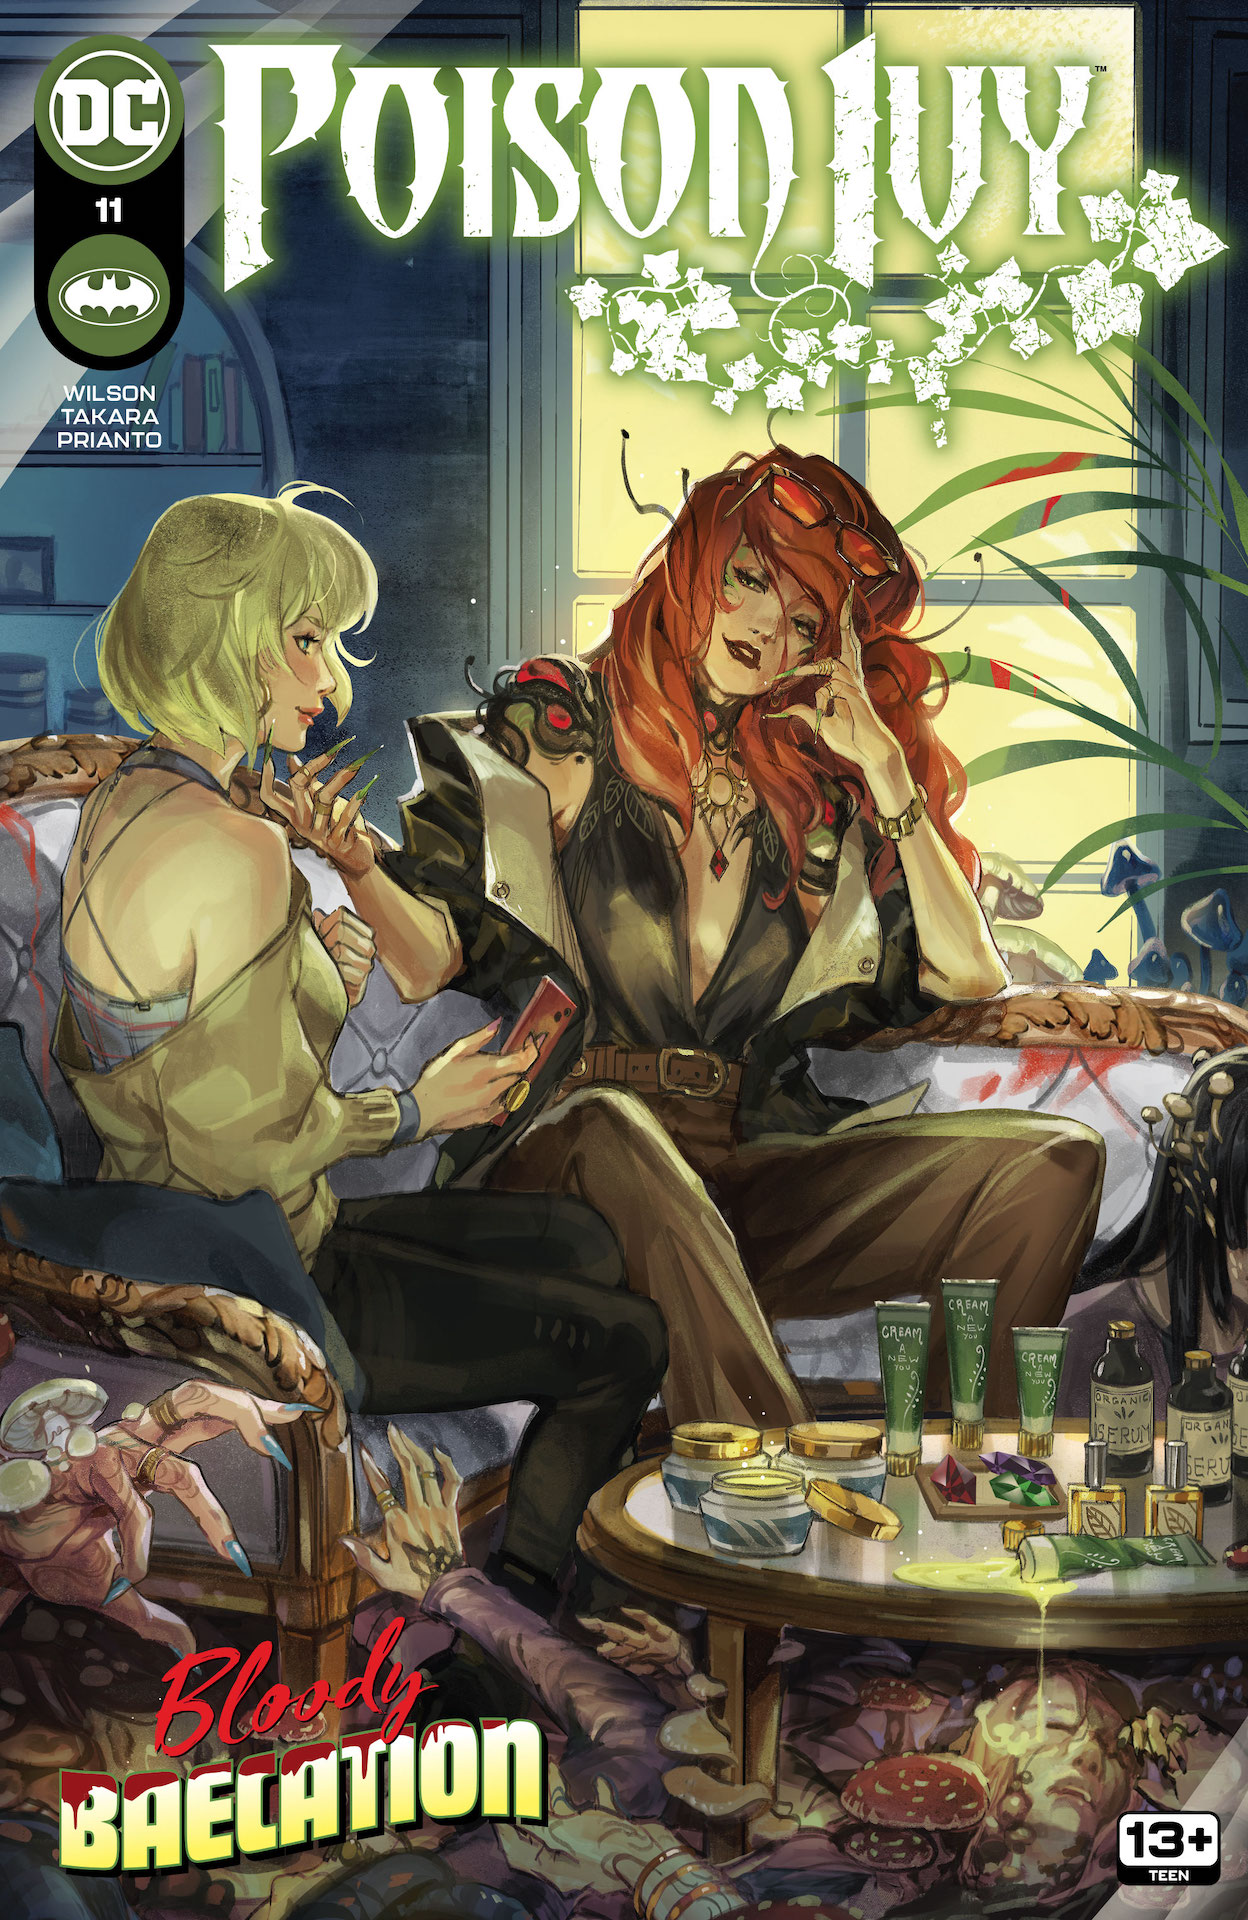 DC Preview: Poison Ivy #11